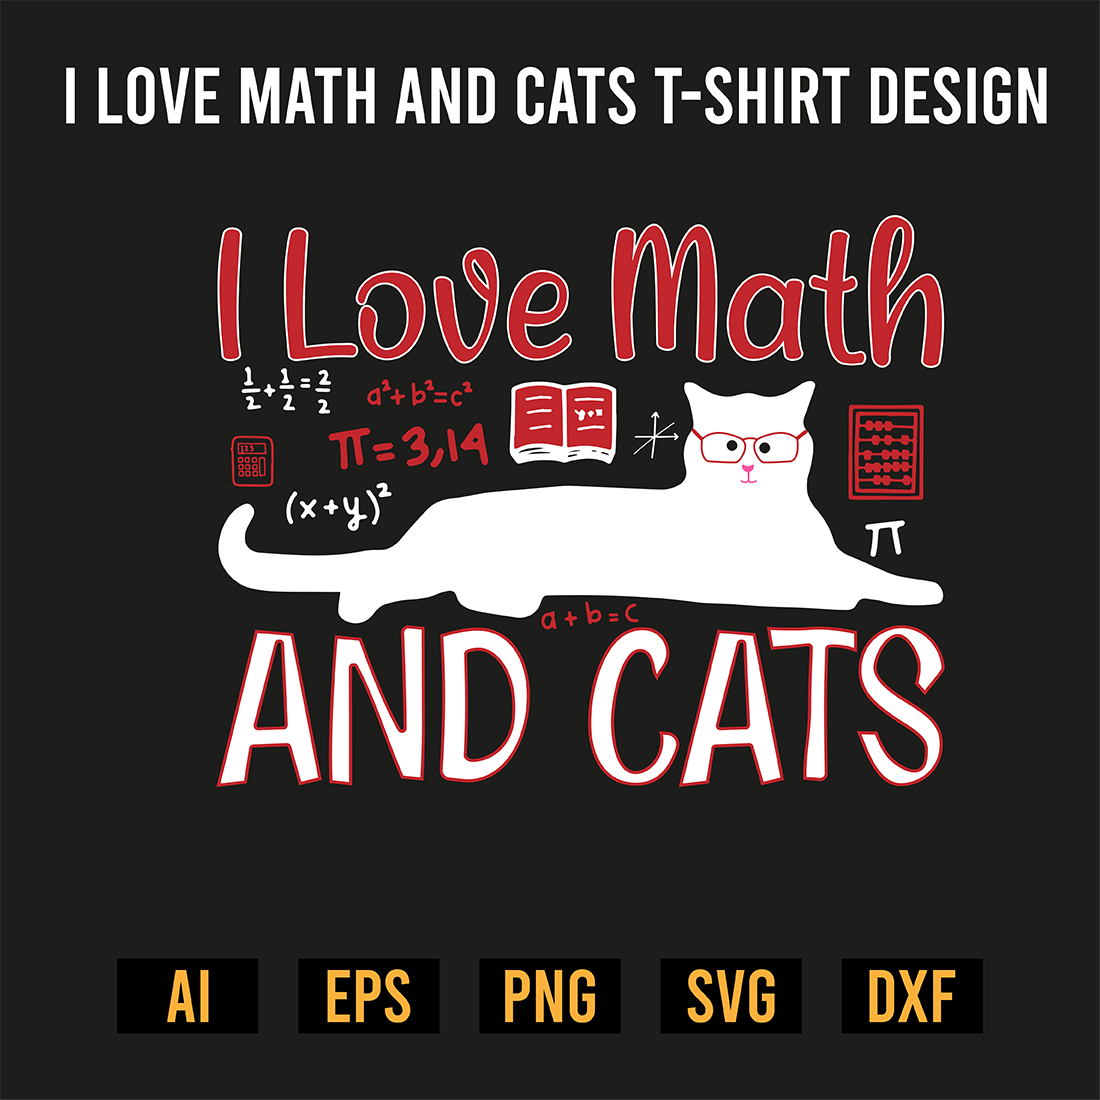 I Love Math And Cats T-Shirt Design image preview.